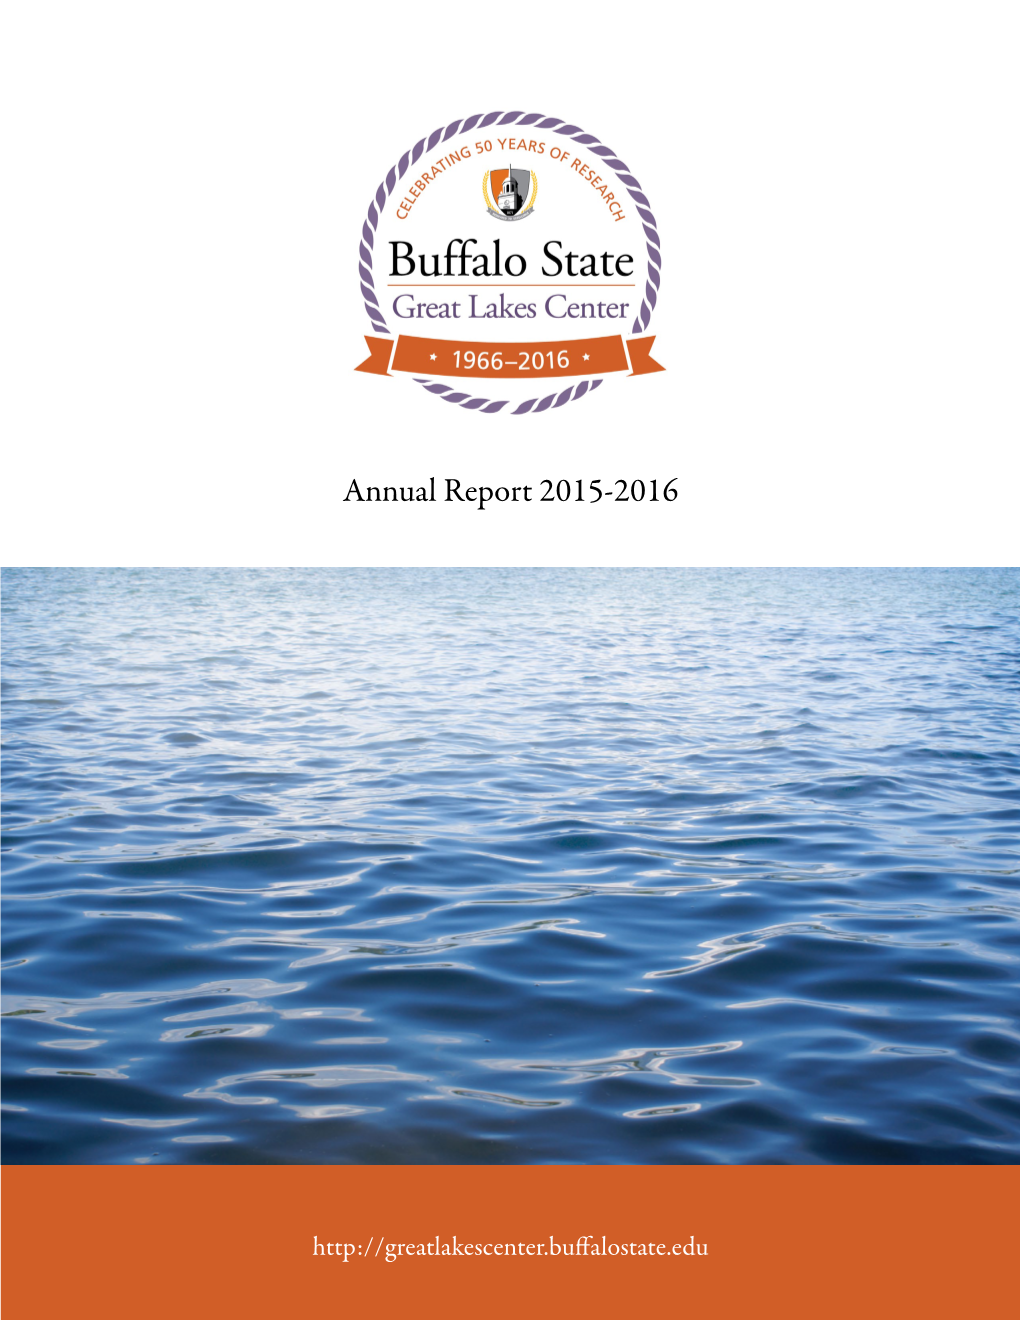 Great Lakes Center Annual Report 2015-2016